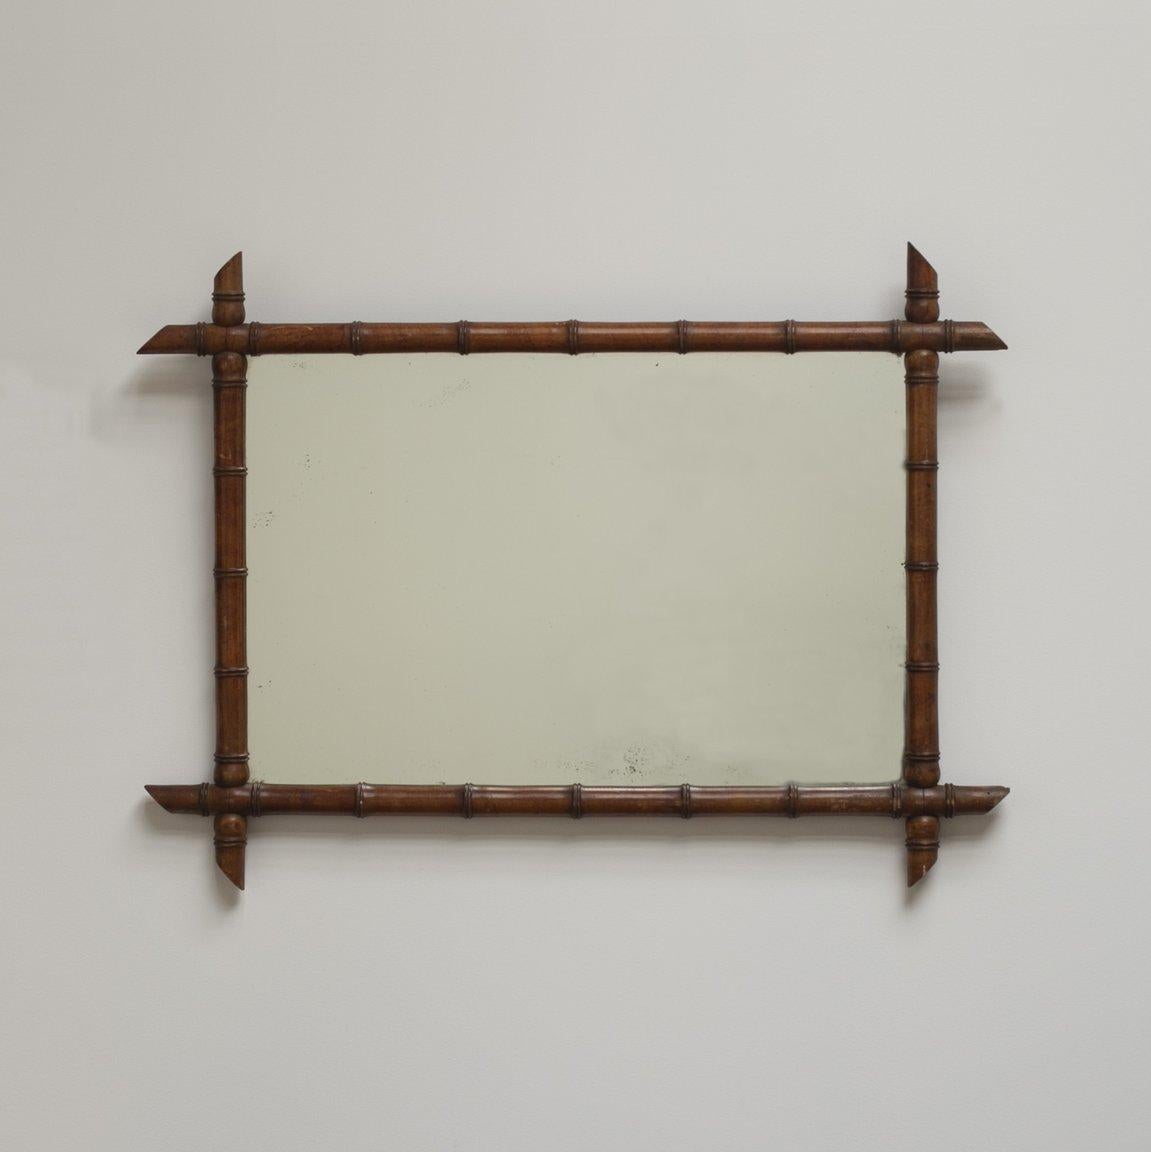 Vintage French faux bamboo wall mirror from France.
Mid-20th century.